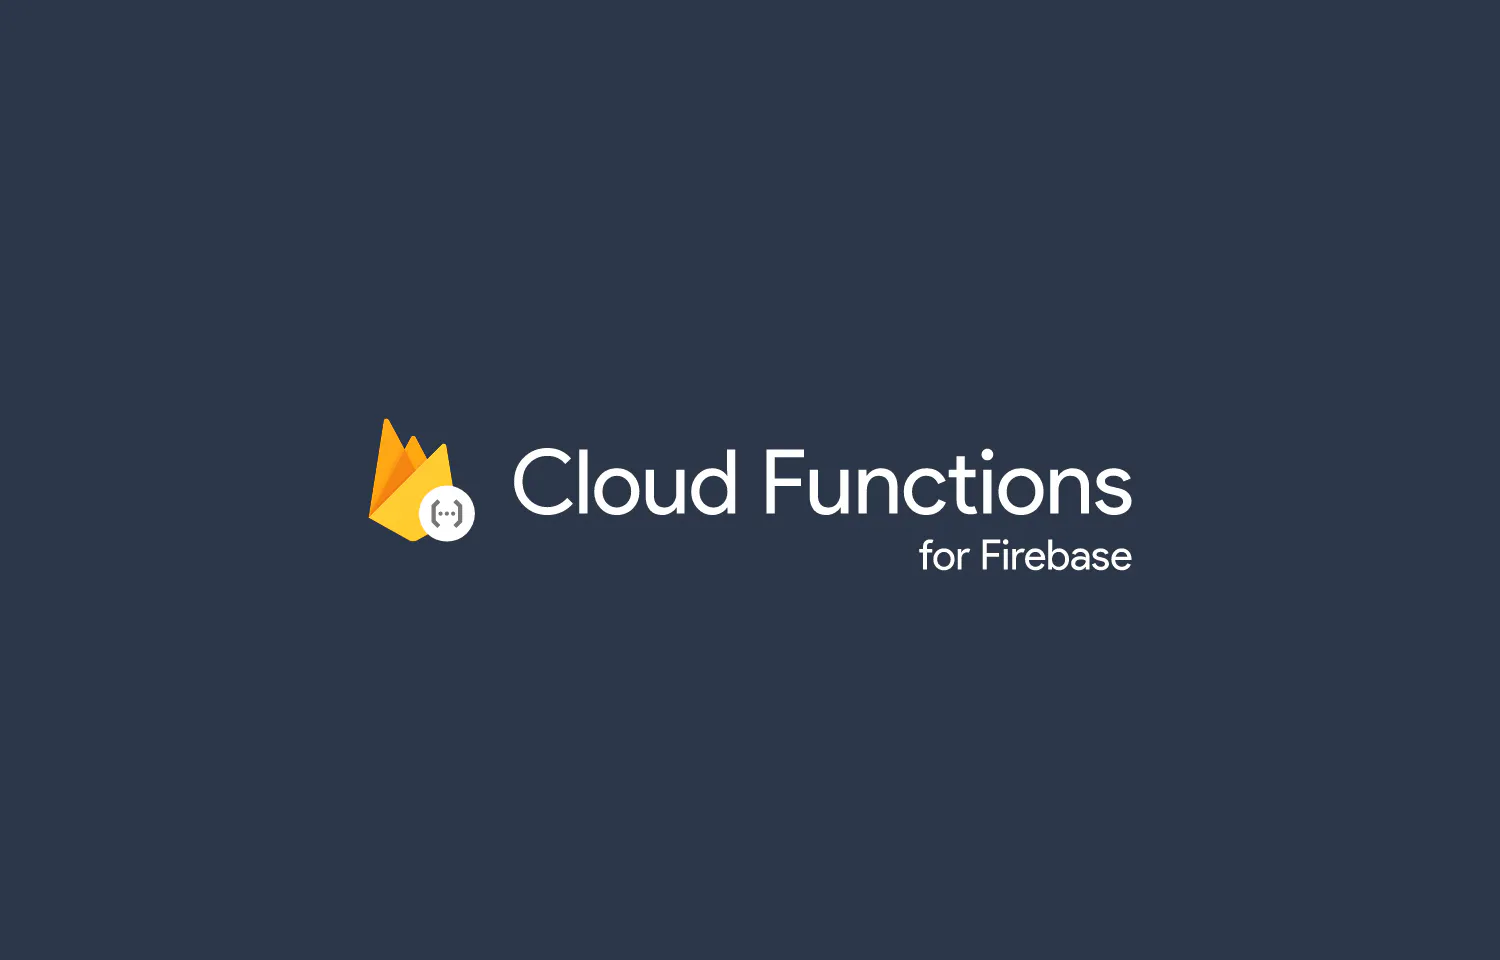 Cloud Functions for firebaseとは？